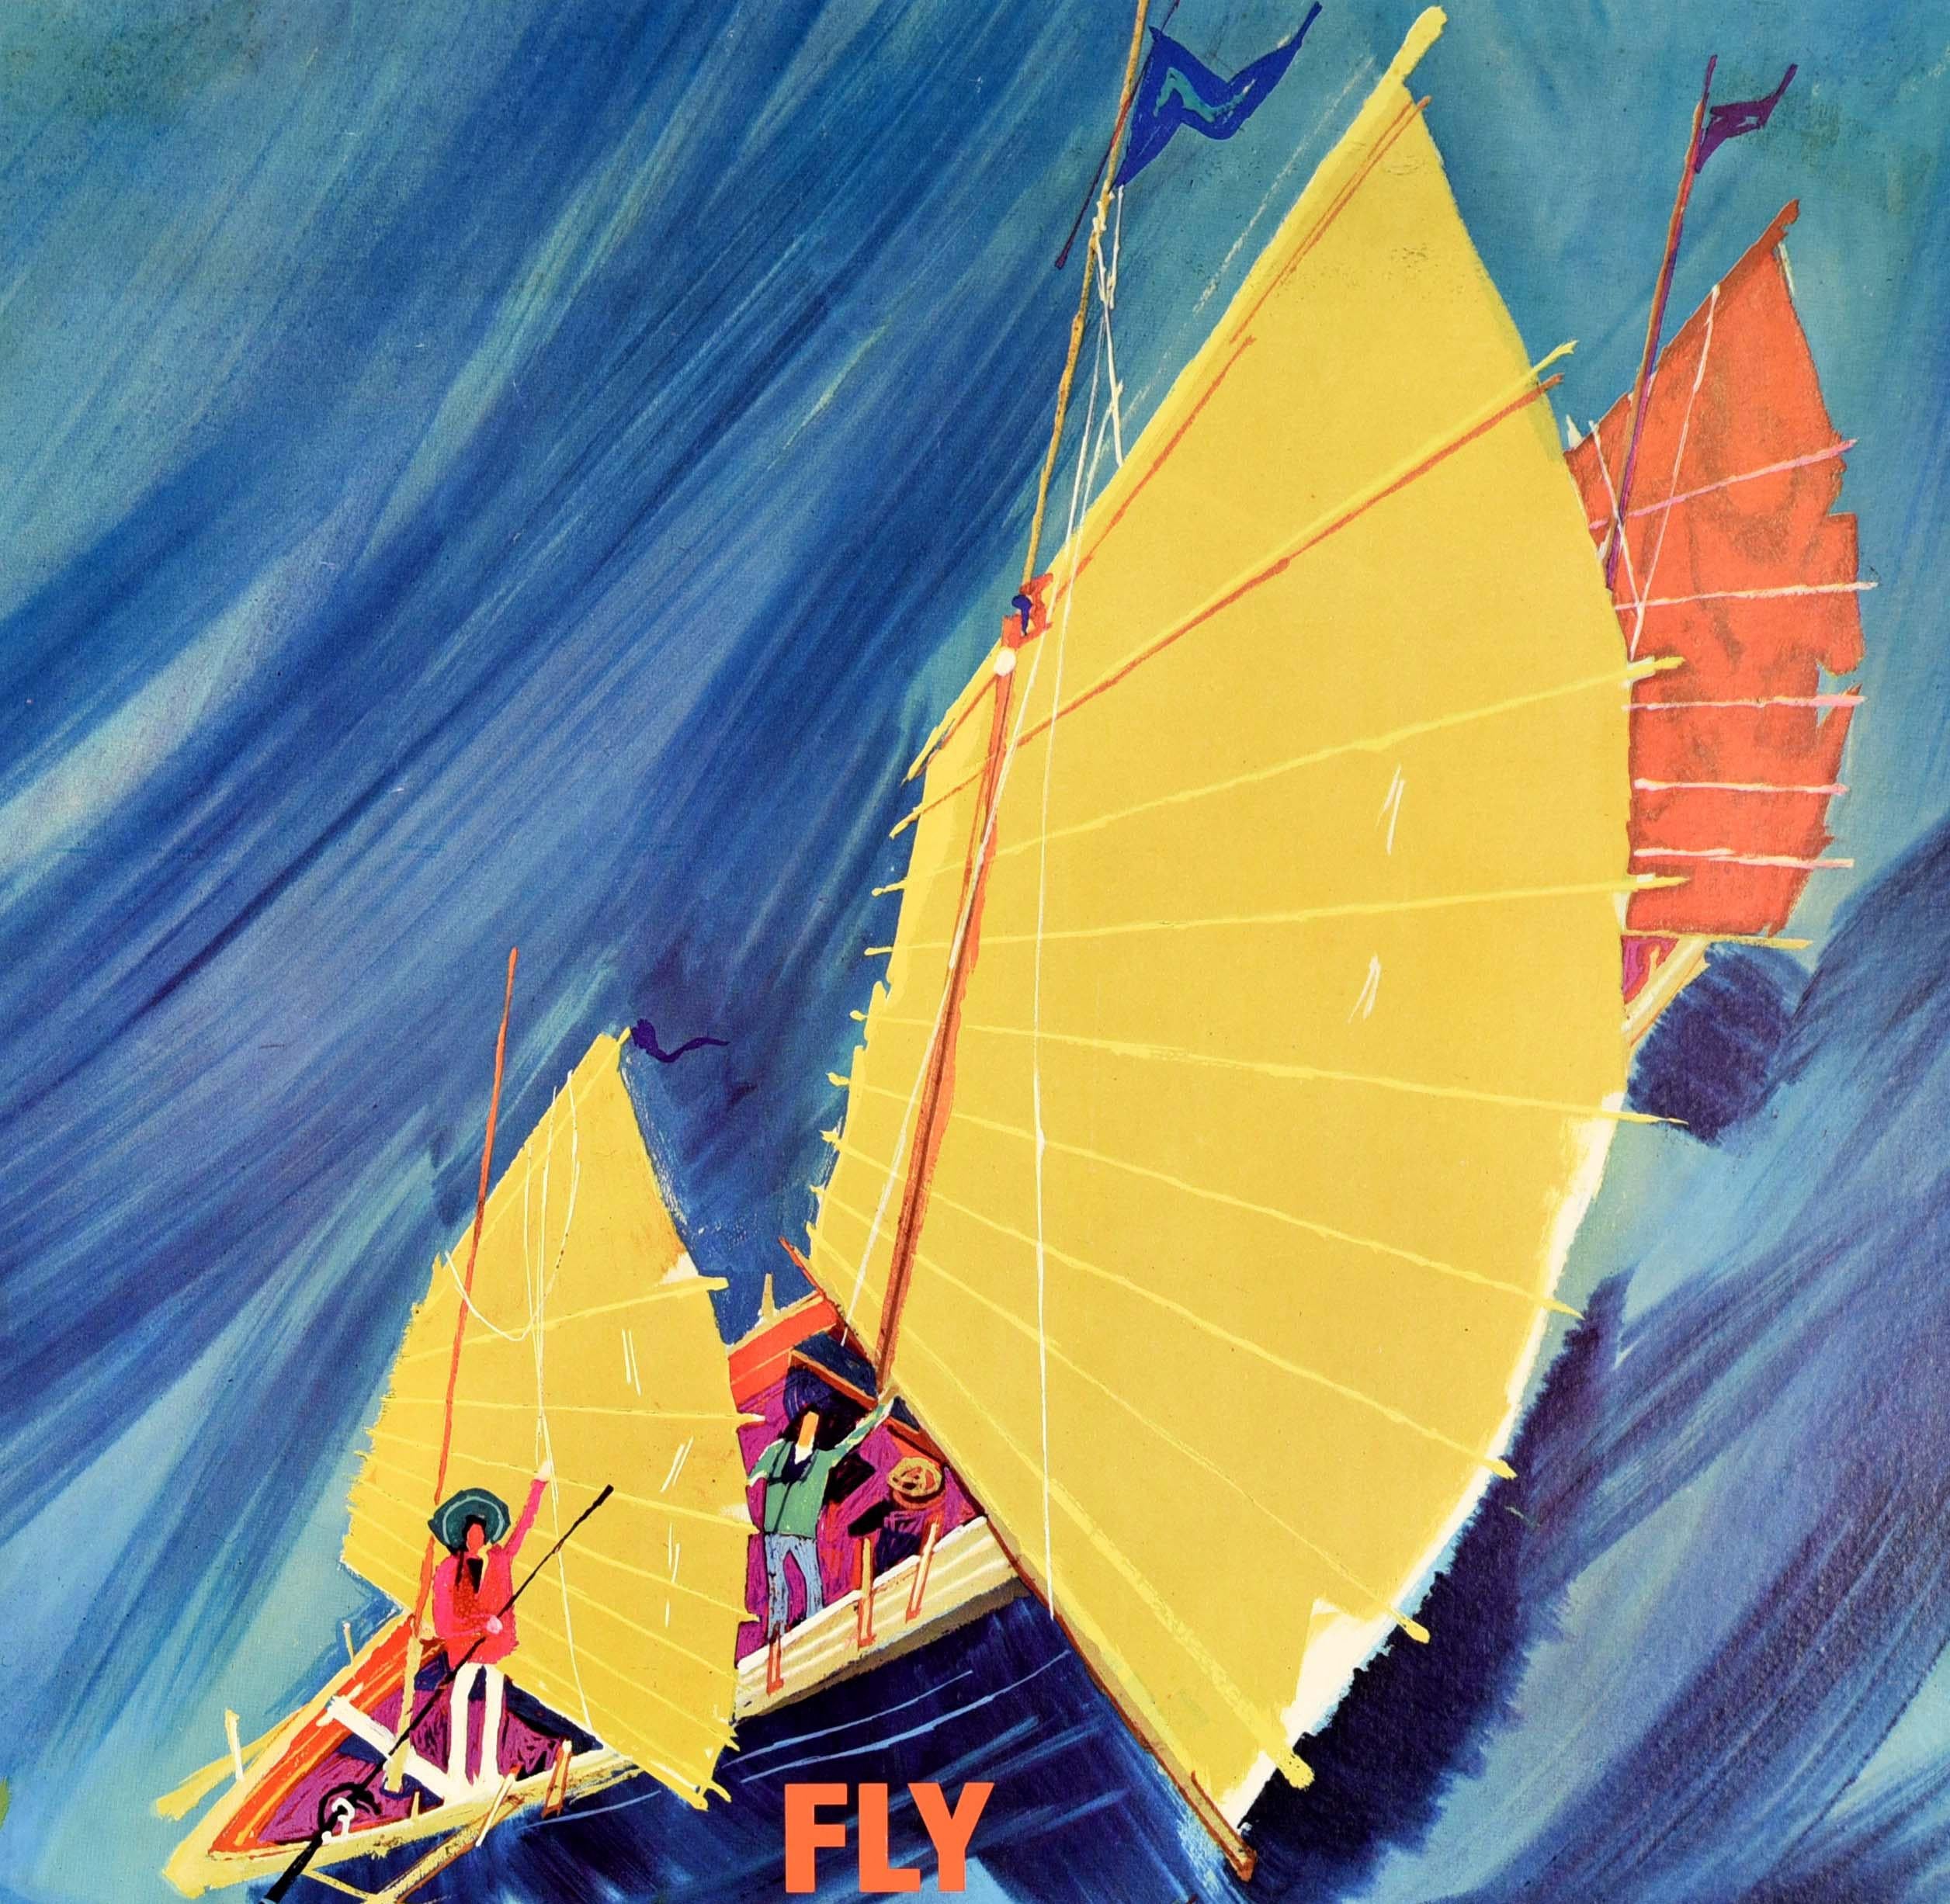 Original Vintage Travel Poster Fly There By BOAC Airline Far East Asia Junk Boat - Blue Print by Unknown